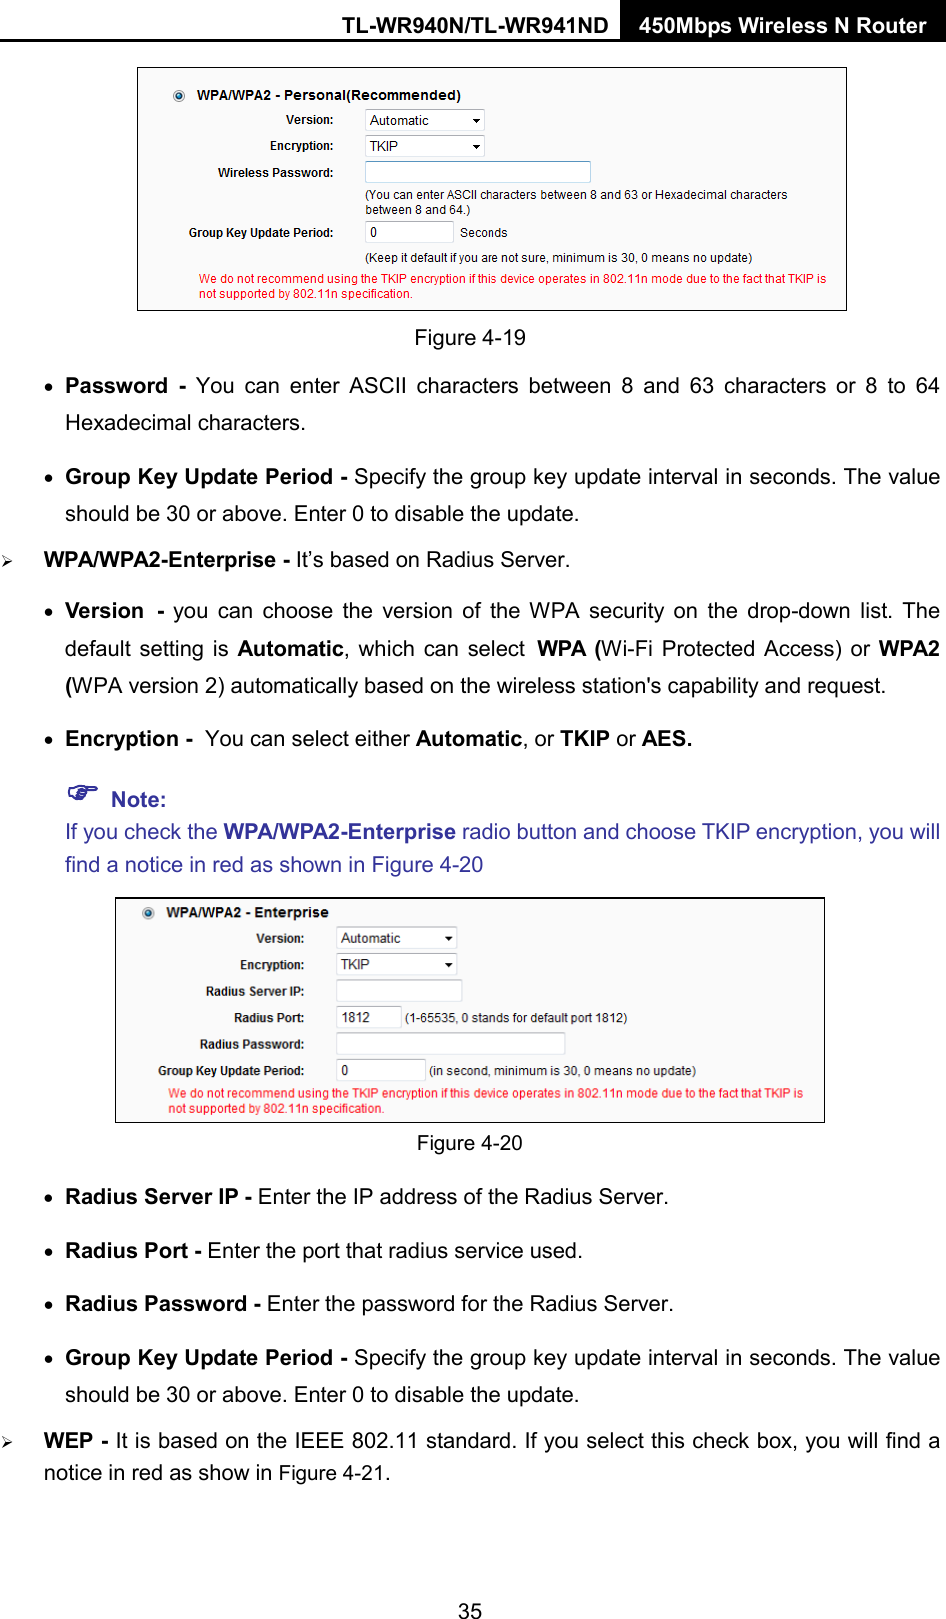 TL-WR940N/TL-WR941ND 450Mbps Wireless N Router   Figure 4-19 • Password - You can enter ASCII characters between 8 and 63 characters or 8 to 64 Hexadecimal characters. • Group Key Update Period - Specify the group key update interval in seconds. The value should be 30 or above. Enter 0 to disable the update.  WPA/WPA2-Enterprise - It’s based on Radius Server. • Version - you can choose the version of the WPA security on the drop-down list. The default setting is Automatic, which can select WPA  (Wi-Fi Protected Access)  or  WPA2 (WPA version 2) automatically based on the wireless station&apos;s capability and request. • Encryption - You can select either Automatic, or TKIP or AES.  Note:   If you check the WPA/WPA2-Enterprise radio button and choose TKIP encryption, you will find a notice in red as shown in Figure 4-20  Figure 4-20 • Radius Server IP - Enter the IP address of the Radius Server. • Radius Port - Enter the port that radius service used. • Radius Password - Enter the password for the Radius Server. • Group Key Update Period - Specify the group key update interval in seconds. The value should be 30 or above. Enter 0 to disable the update.  WEP - It is based on the IEEE 802.11 standard. If you select this check box, you will find a notice in red as show in Figure 4-21.   35 